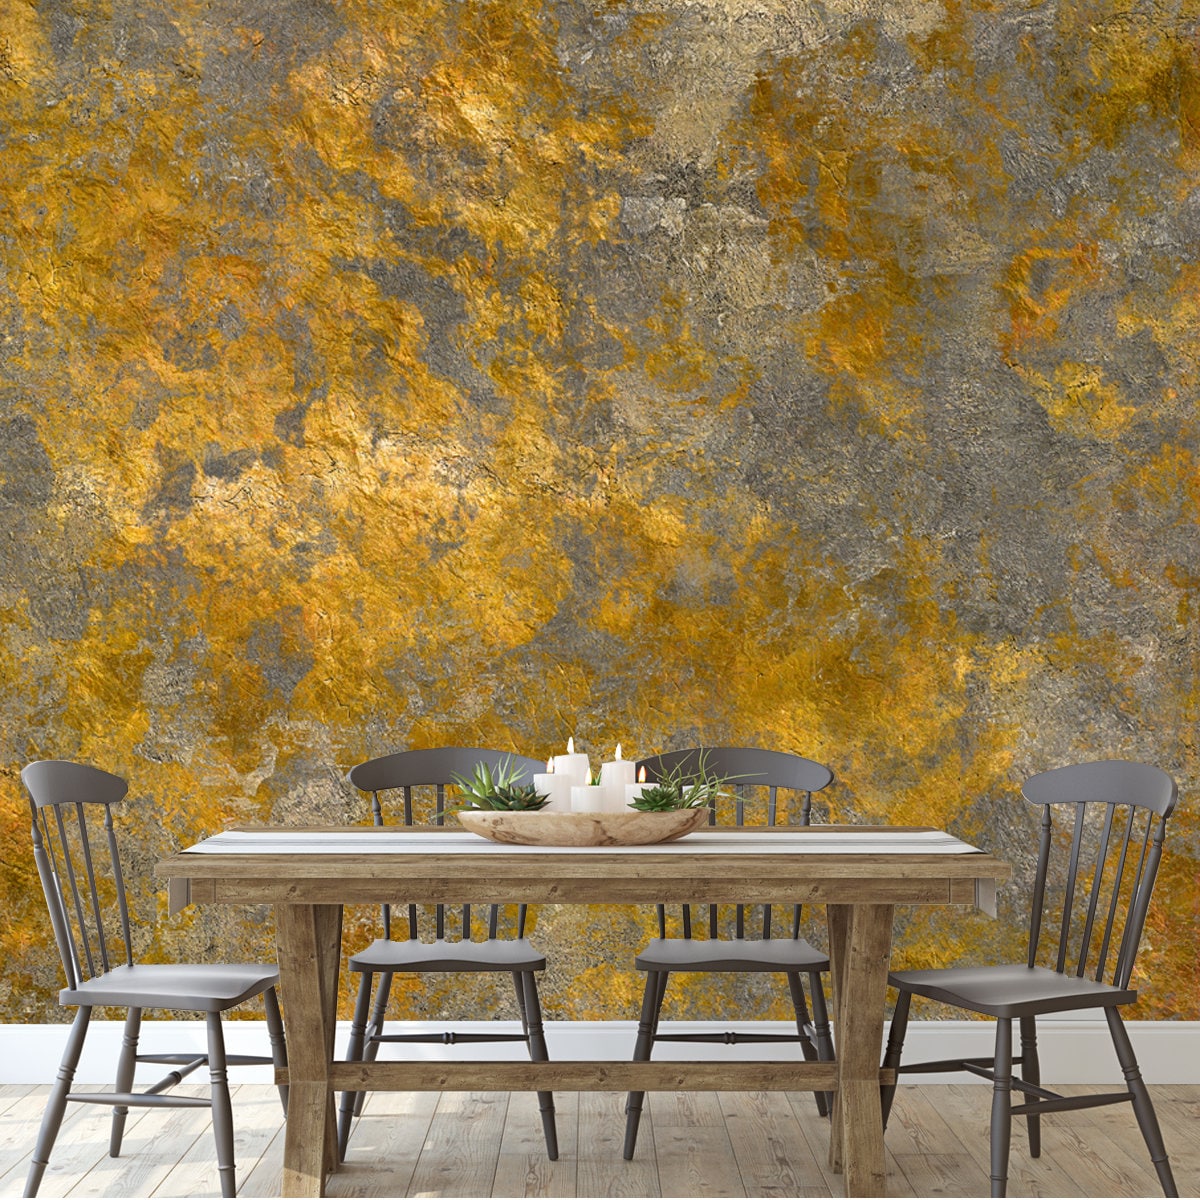 Metallic Gold and Slate Gray Texture Wallpaper Dining Room Mural